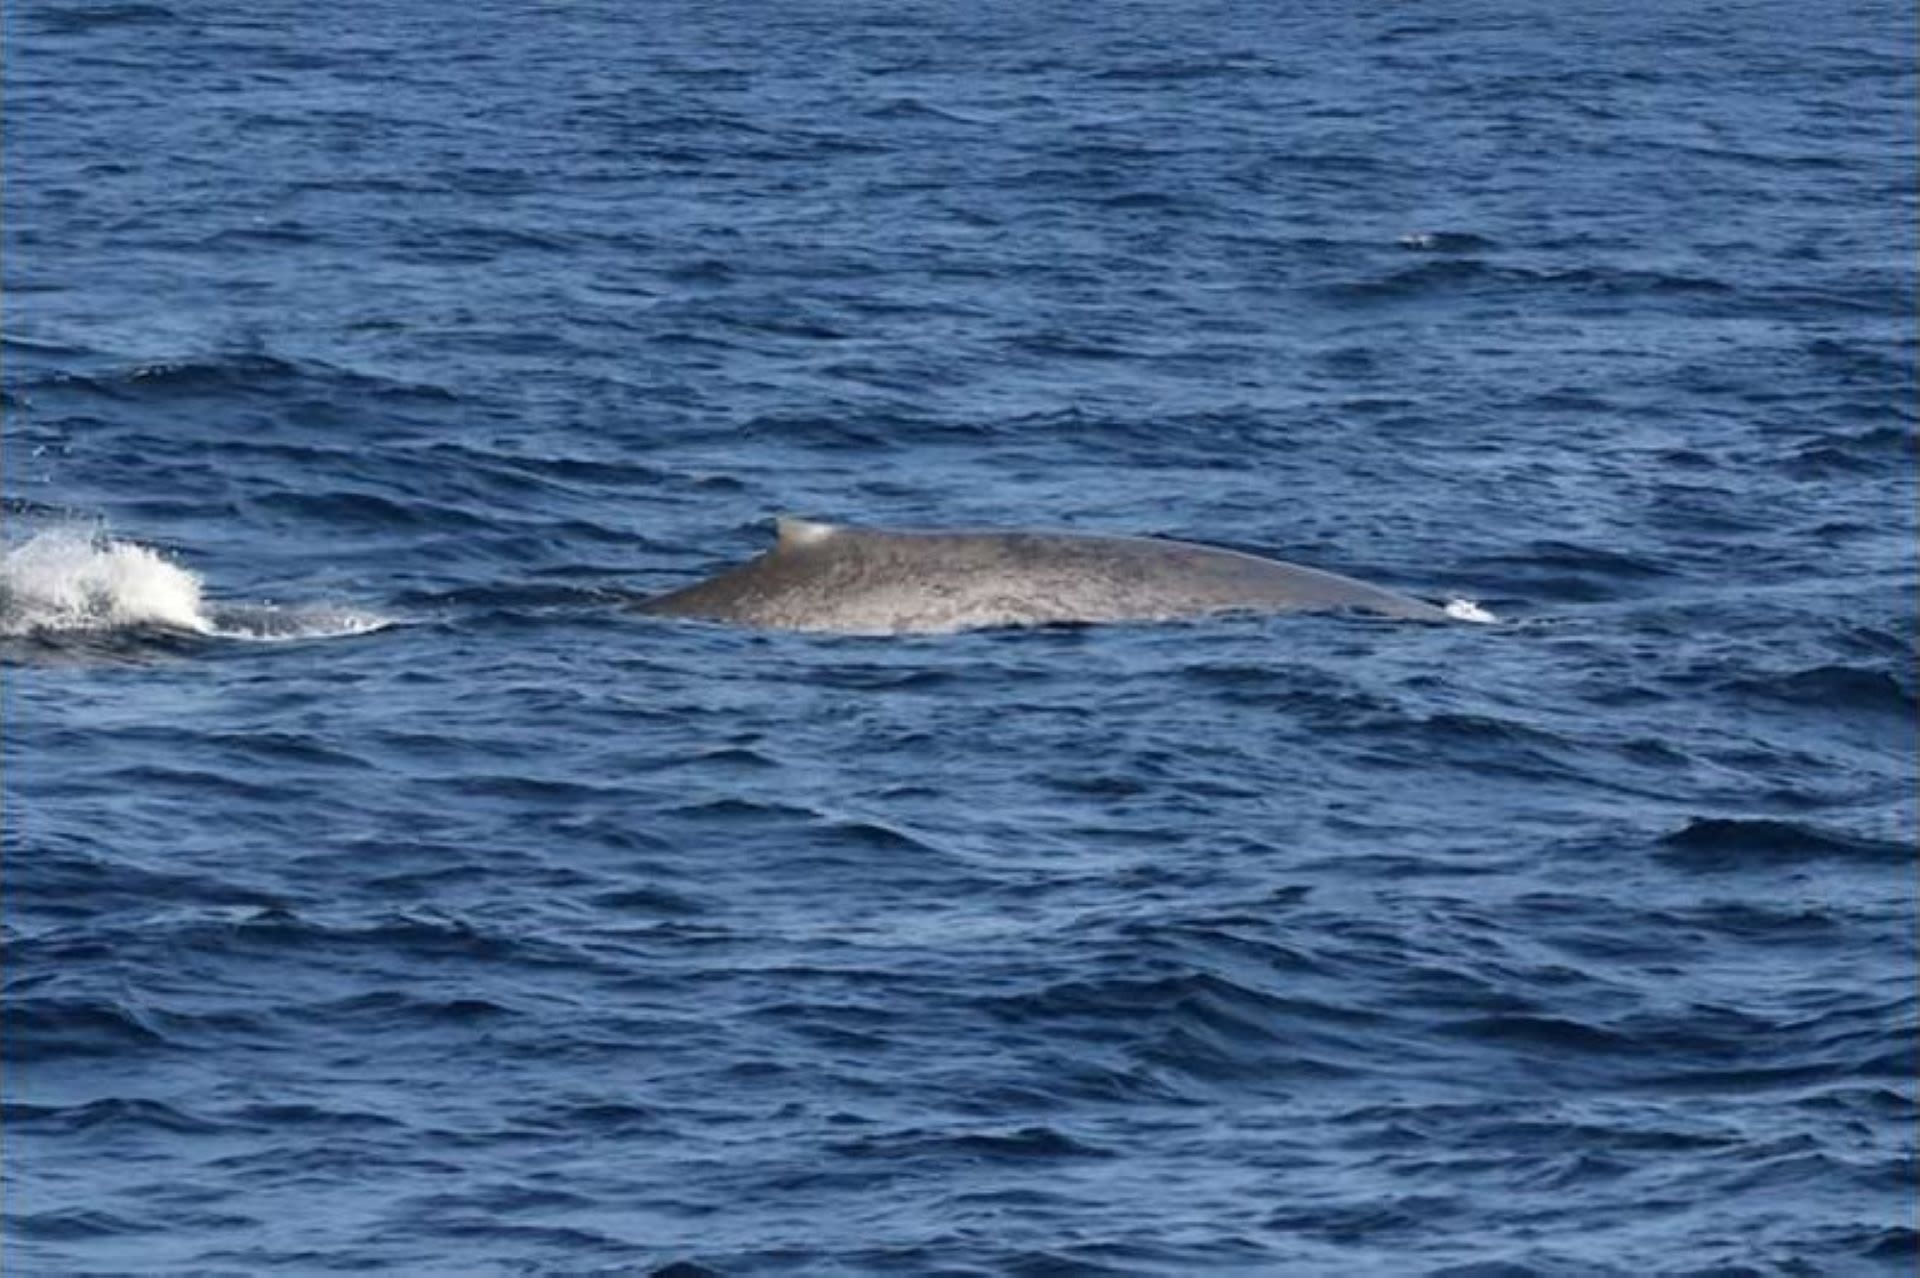 Researchers surprised to find several rare blue whales during expedition: 'These are positive steps towards their conservation'